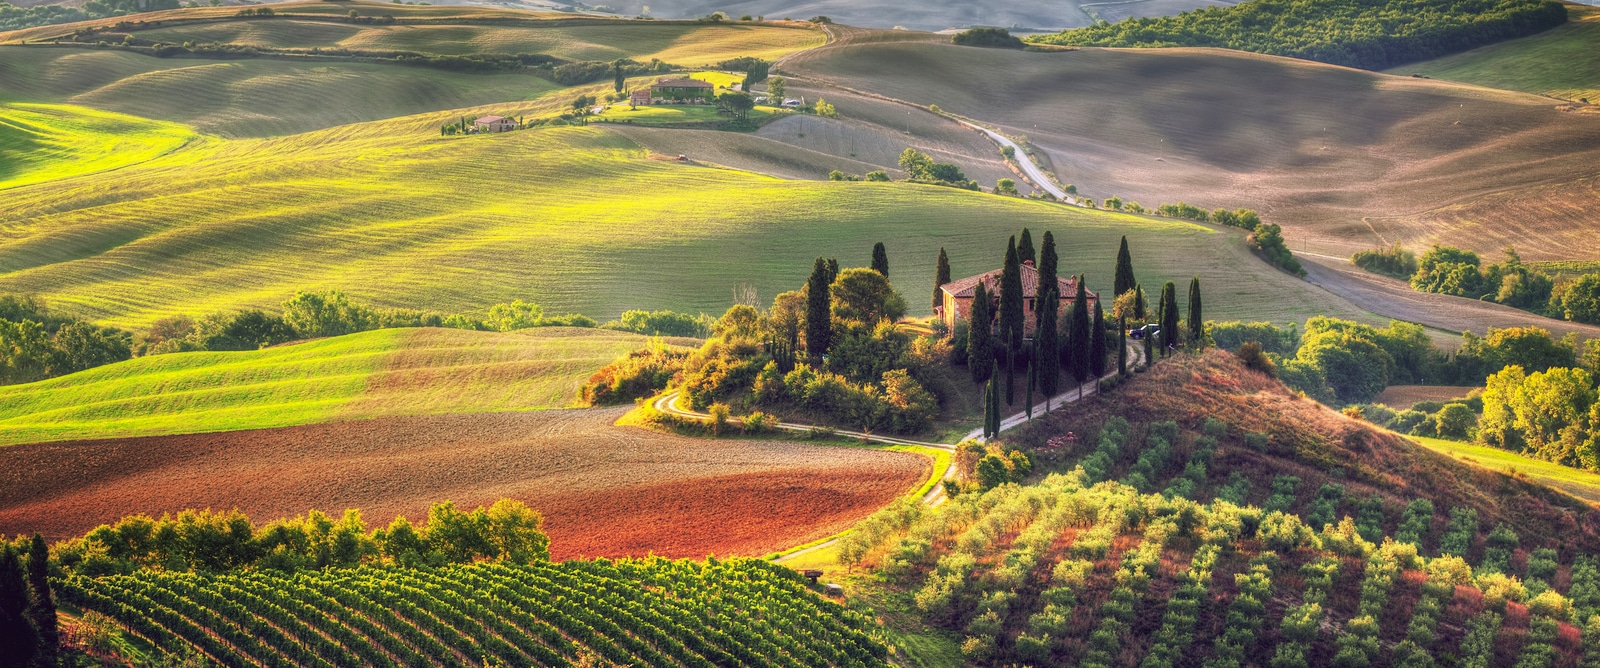 Appreciate Tuscan farm landscapes during Tuscany trips for women only